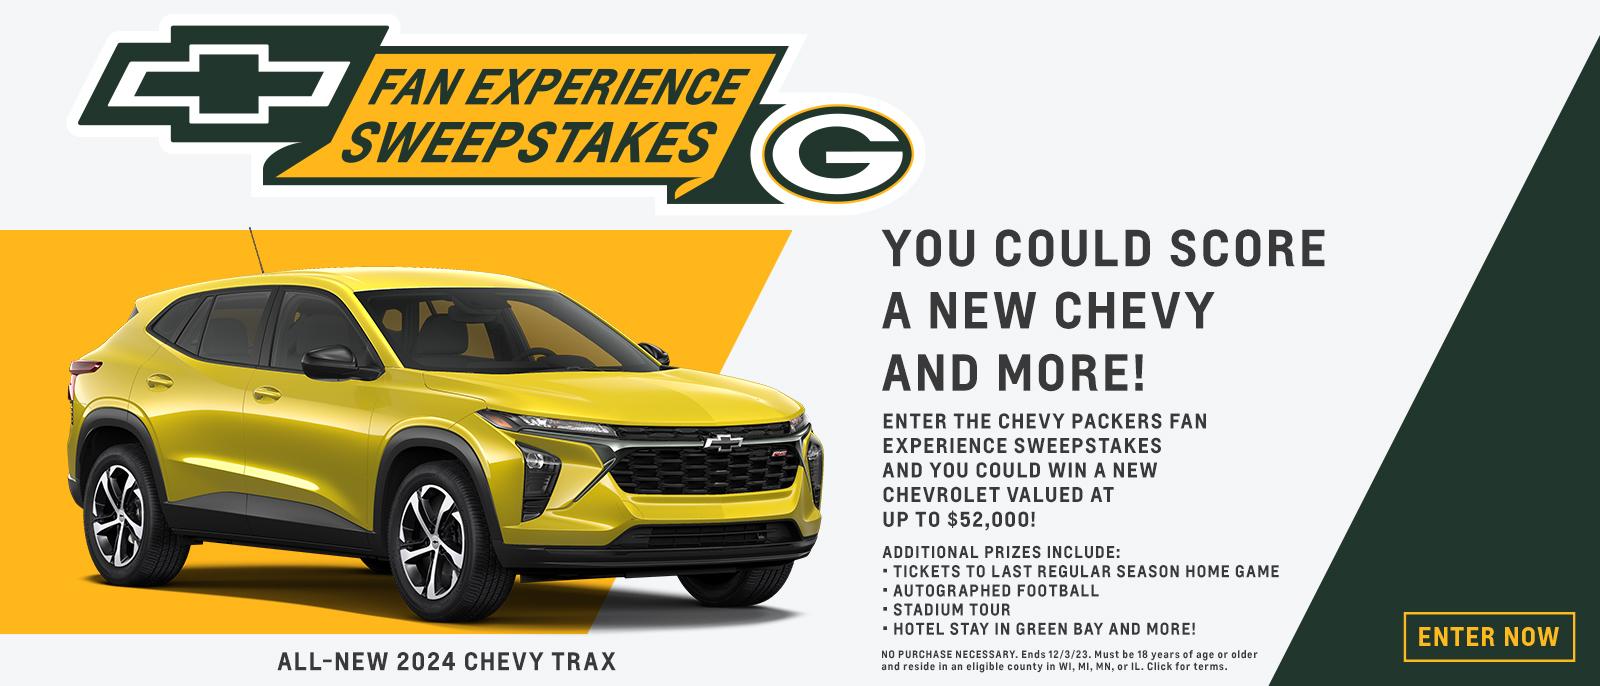 Fan Experience Sweepstakes. You could score a new Chevy and more! No purchase necessary. Ends 12/3/23. Must be 18 years of age or older and reside in an eligible county in WI, MI, MN, or IL. Click for terms.